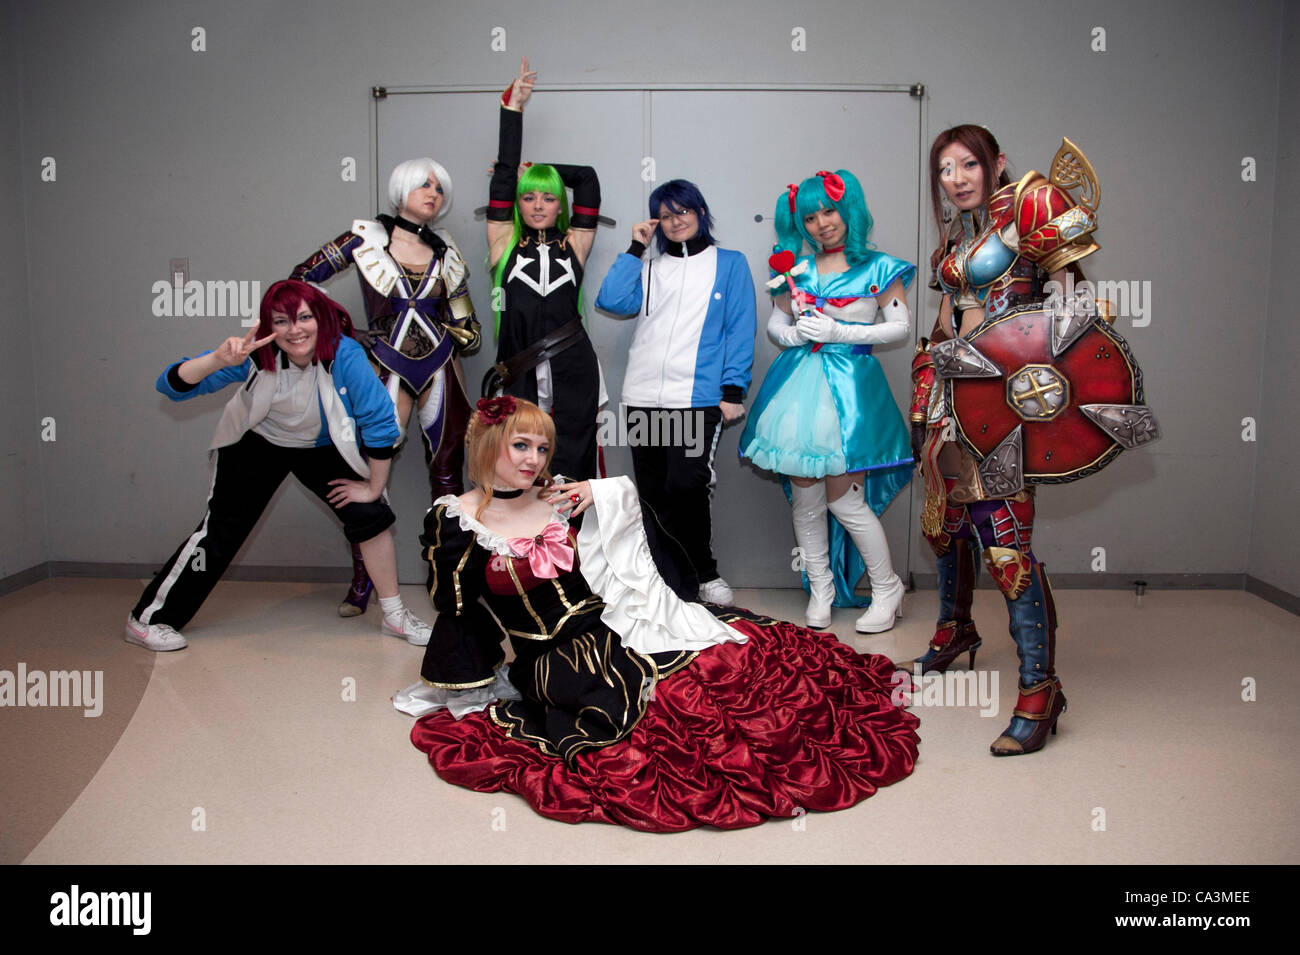 June 2, 2012, Tokyo, Japan - Foreing women dress as a anime character during the Moe Culture Festival 2012.  The Anime and Cosplay exhibition 'Moe Culture Festival 2012' lasts from June 2nd to 3th at Otaku Sangyou Plaza Pio. (Photo by Rodrigo Reyes Marin/AFLO) Stock Photo